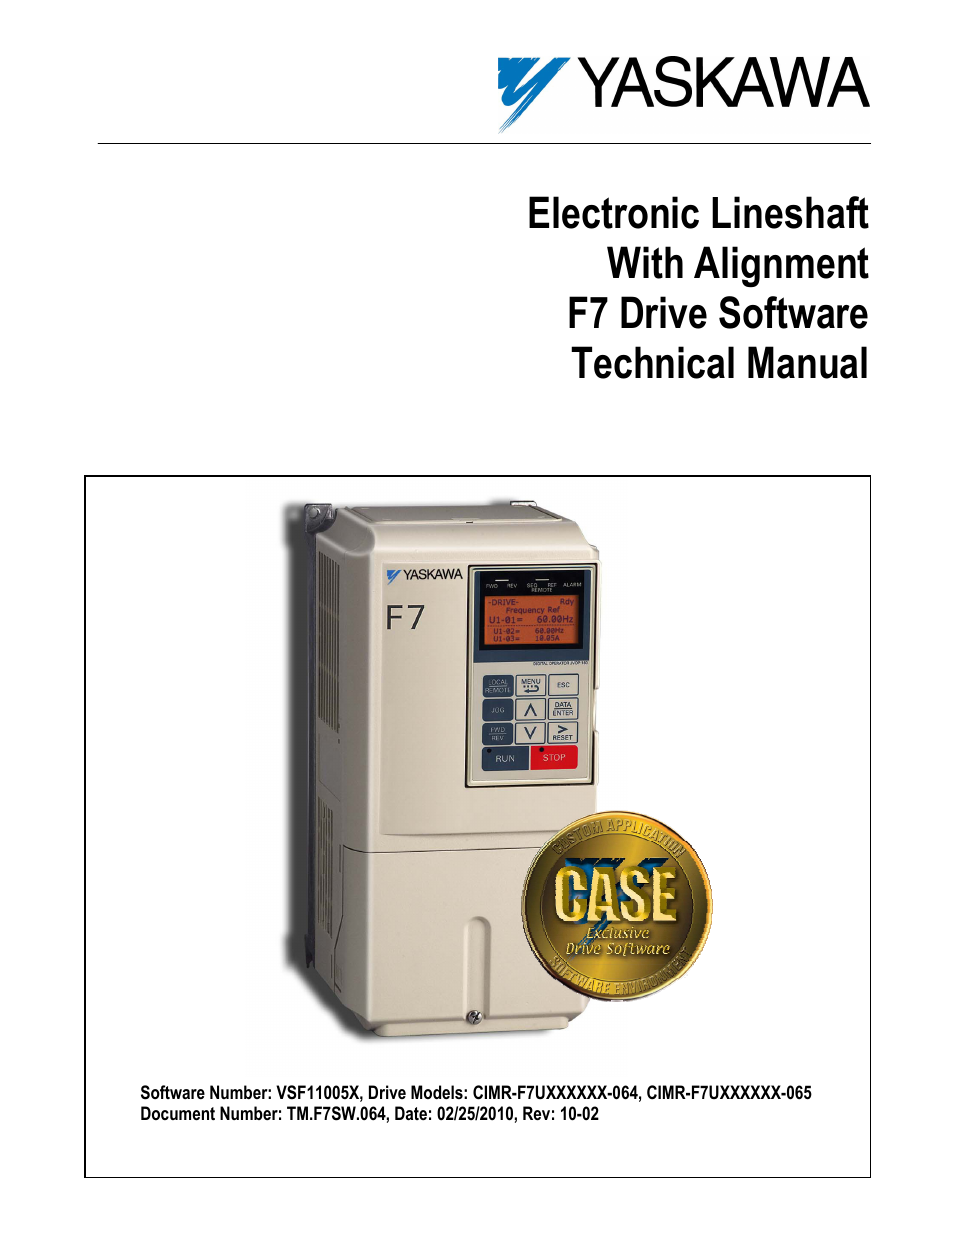 Electronic Lineshaft with Alignment F7 Drive Software